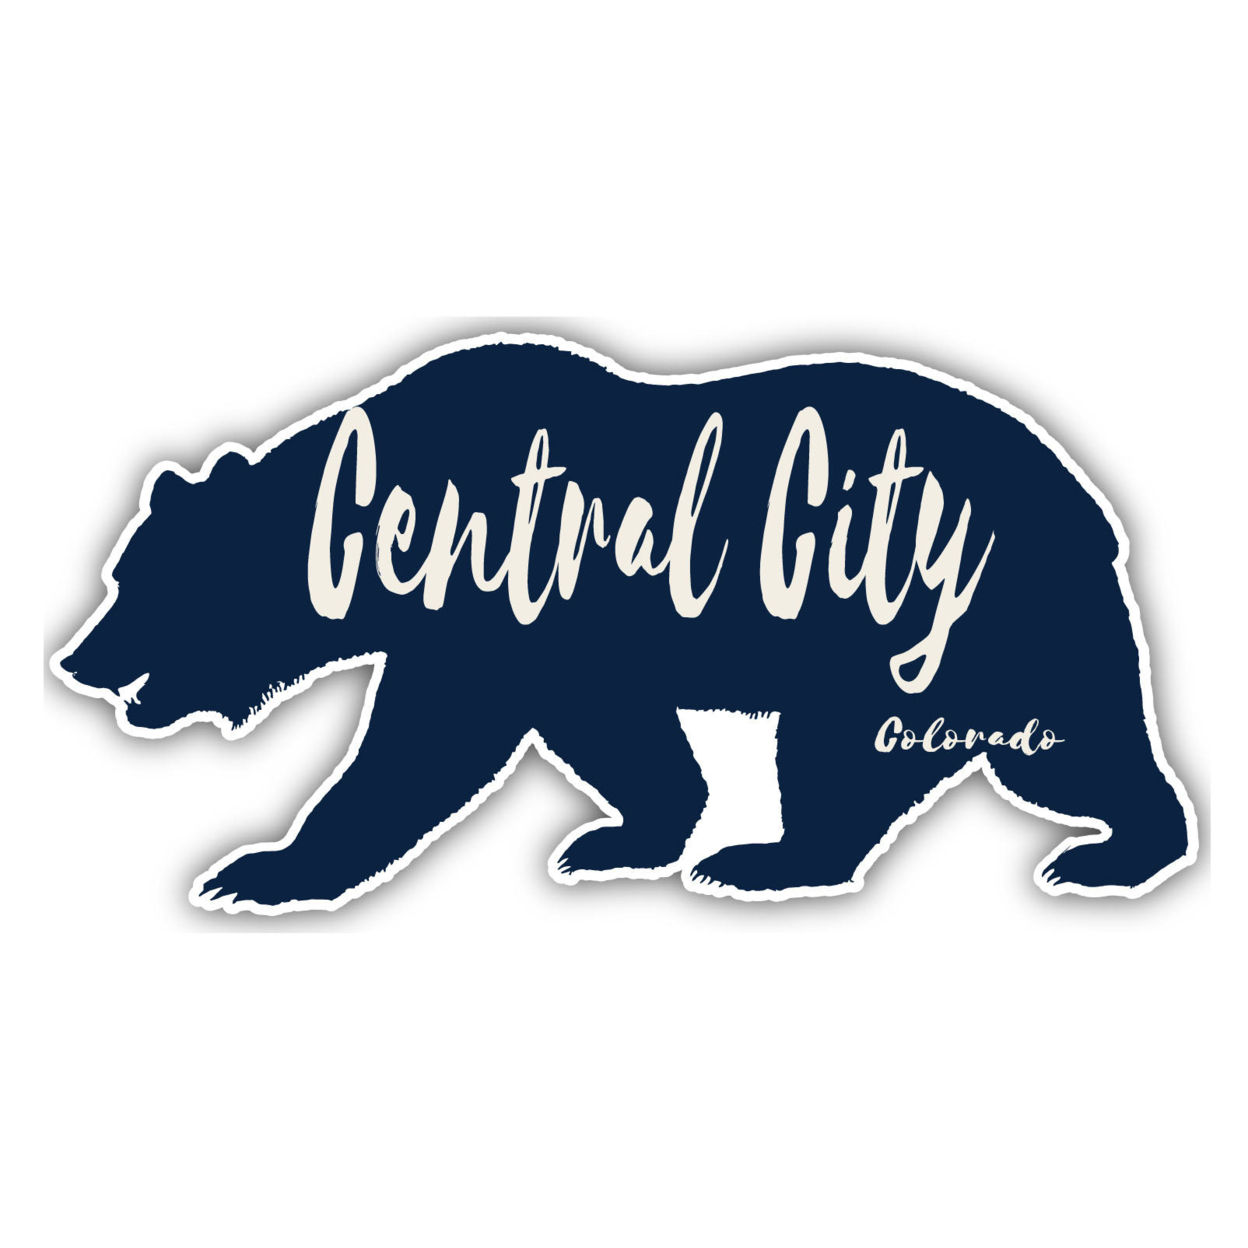 Central City Colorado Souvenir Decorative Stickers (Choose Theme And Size) - 4-Pack, 10-Inch, Camp Life